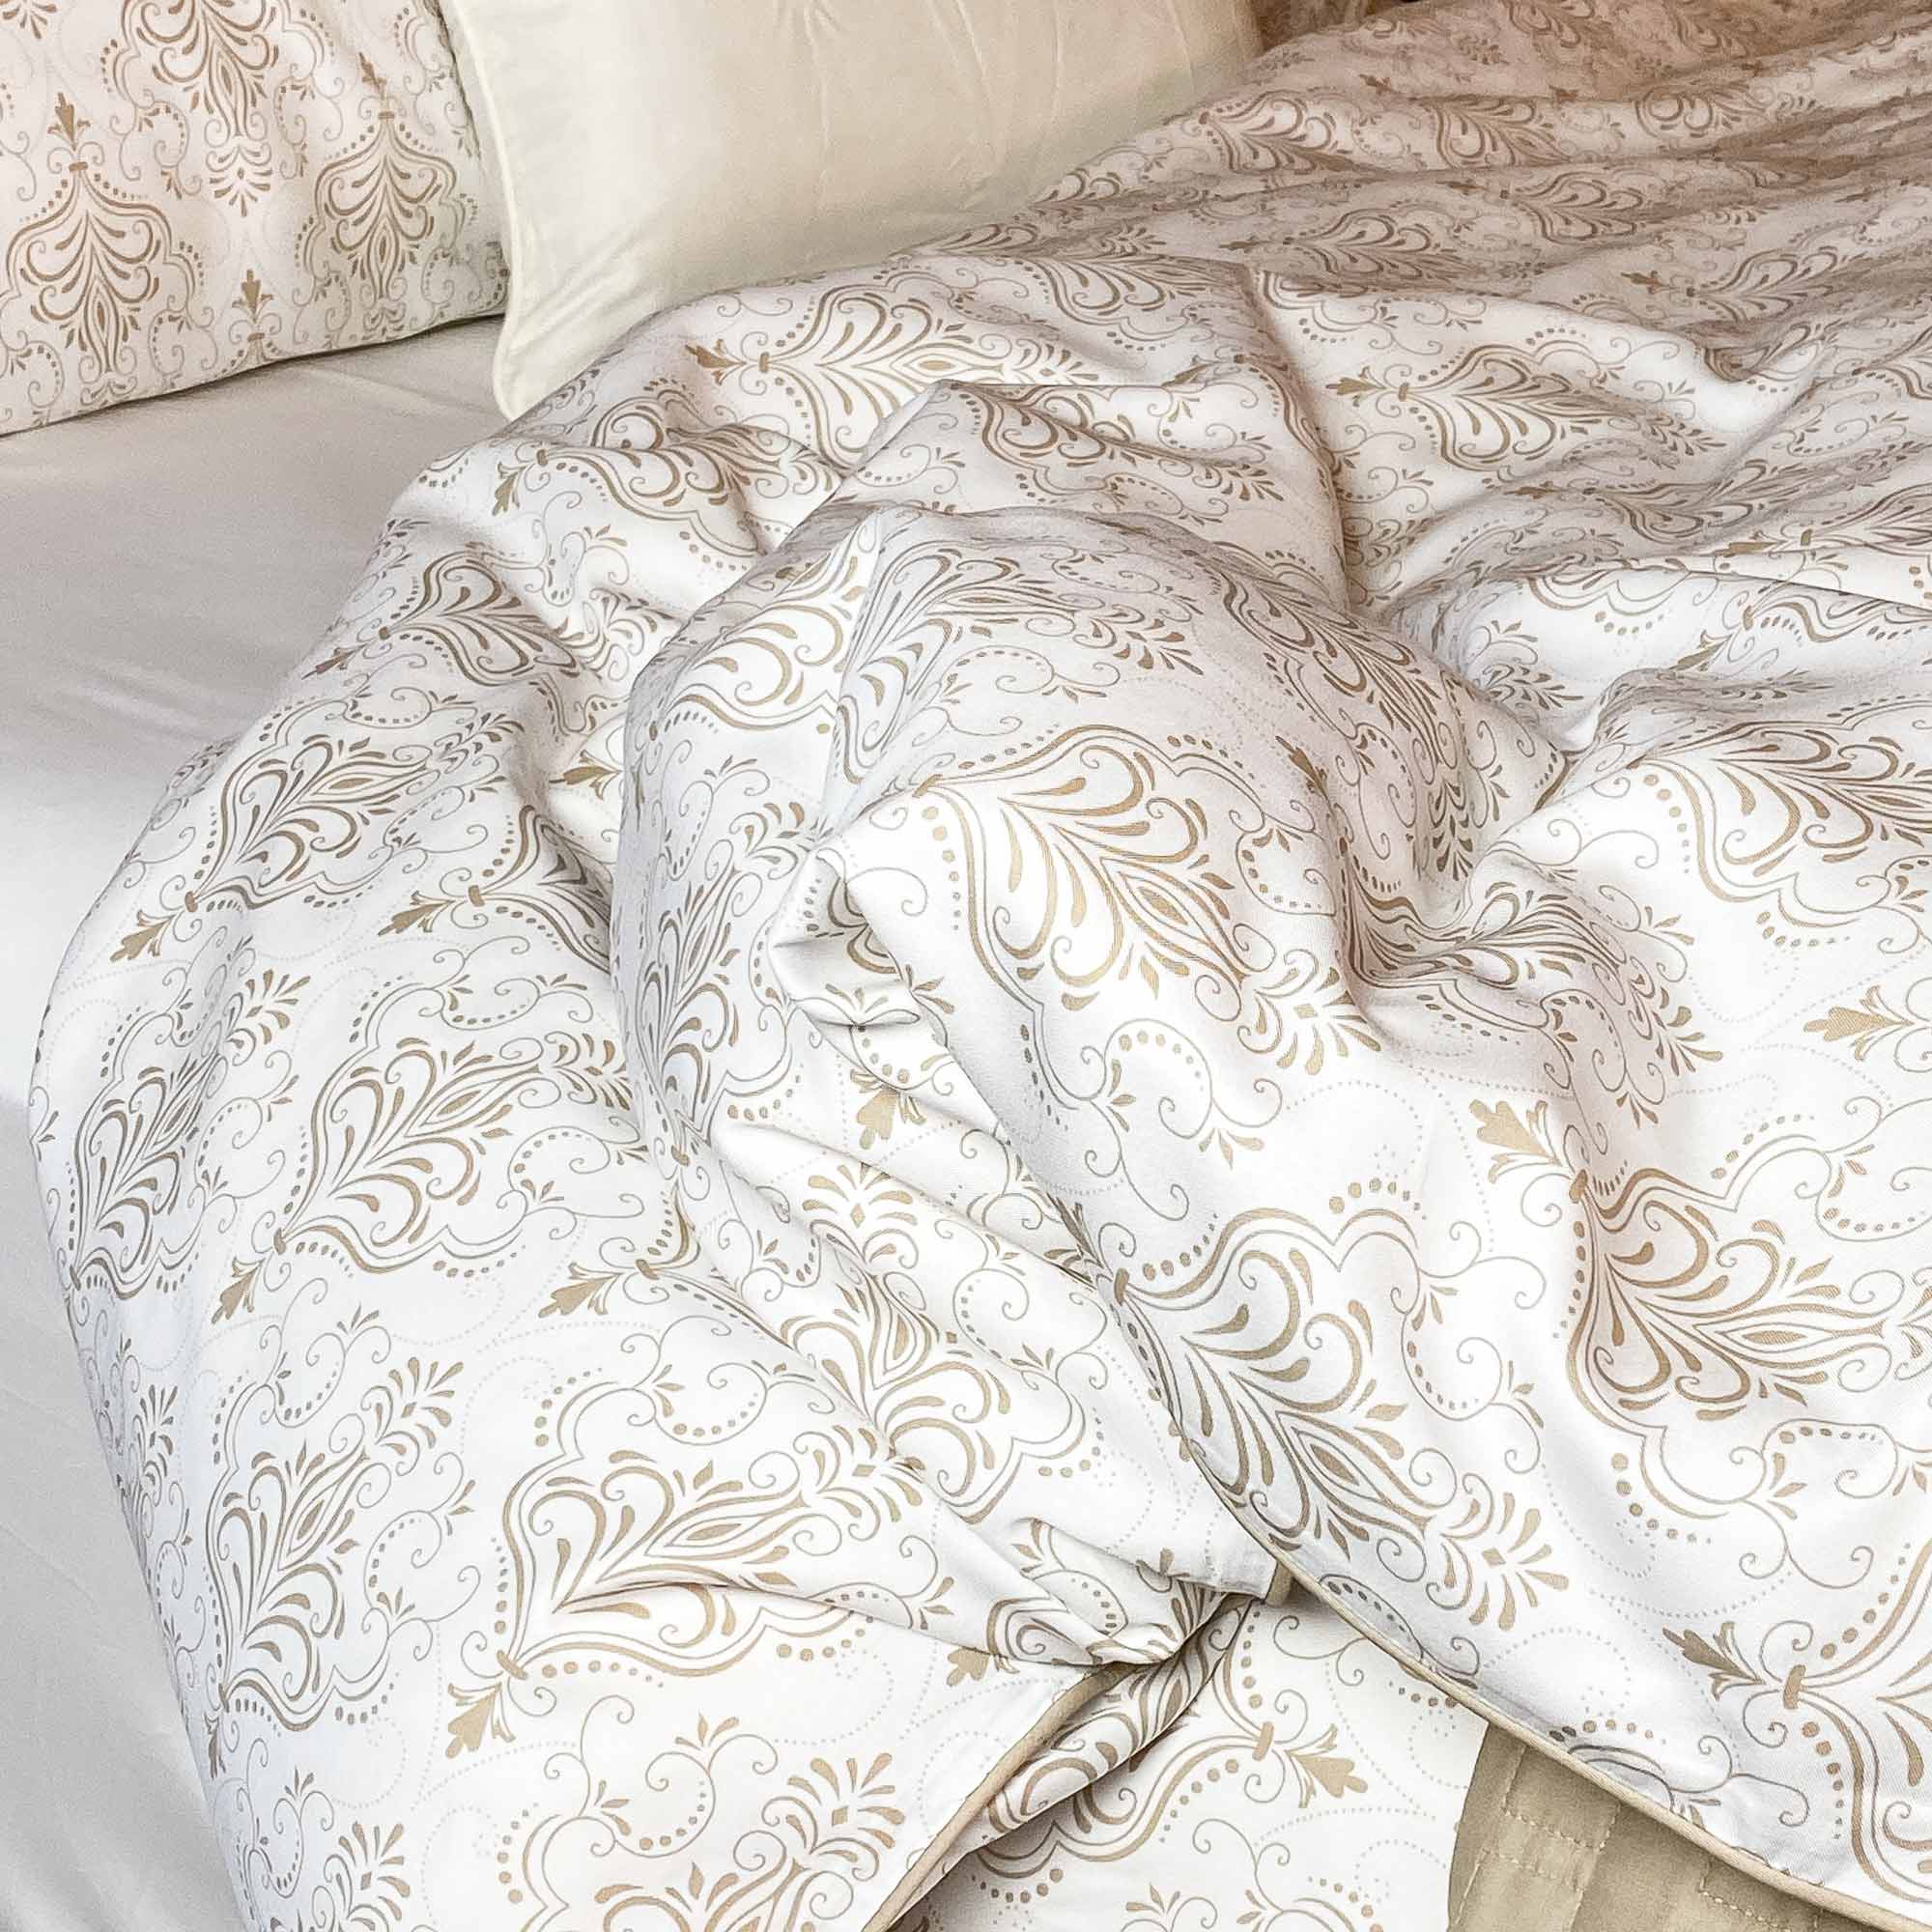 Luxury 100% Bamboo Duvet Cover Set With Shams - Luxuriously Smooth, Breathable with a Silky Hand-feel Duvet Sheet Sets - Champagne Damask